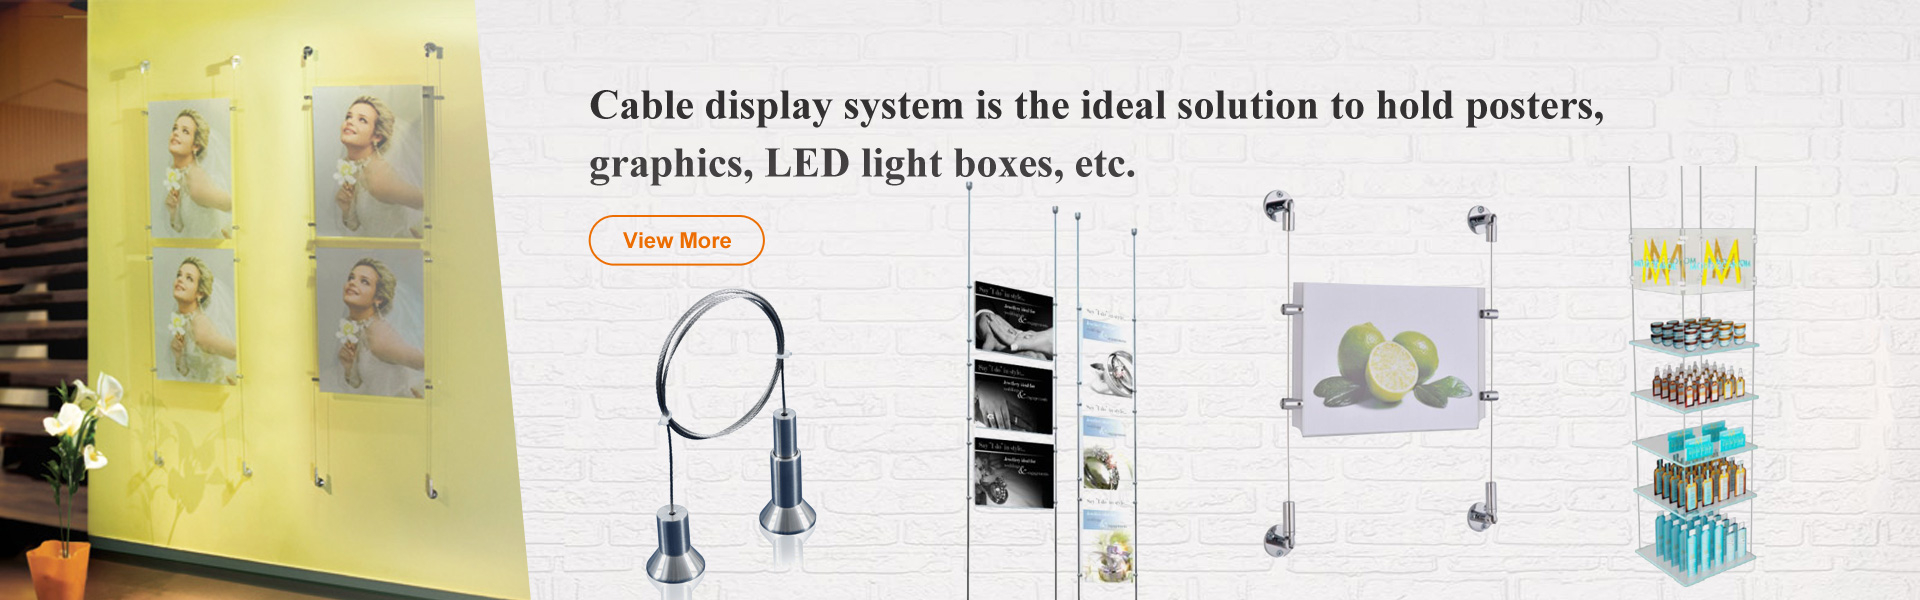 Cable display system is the ideal solution to hold posters, graphics, LED light boxes, etc.